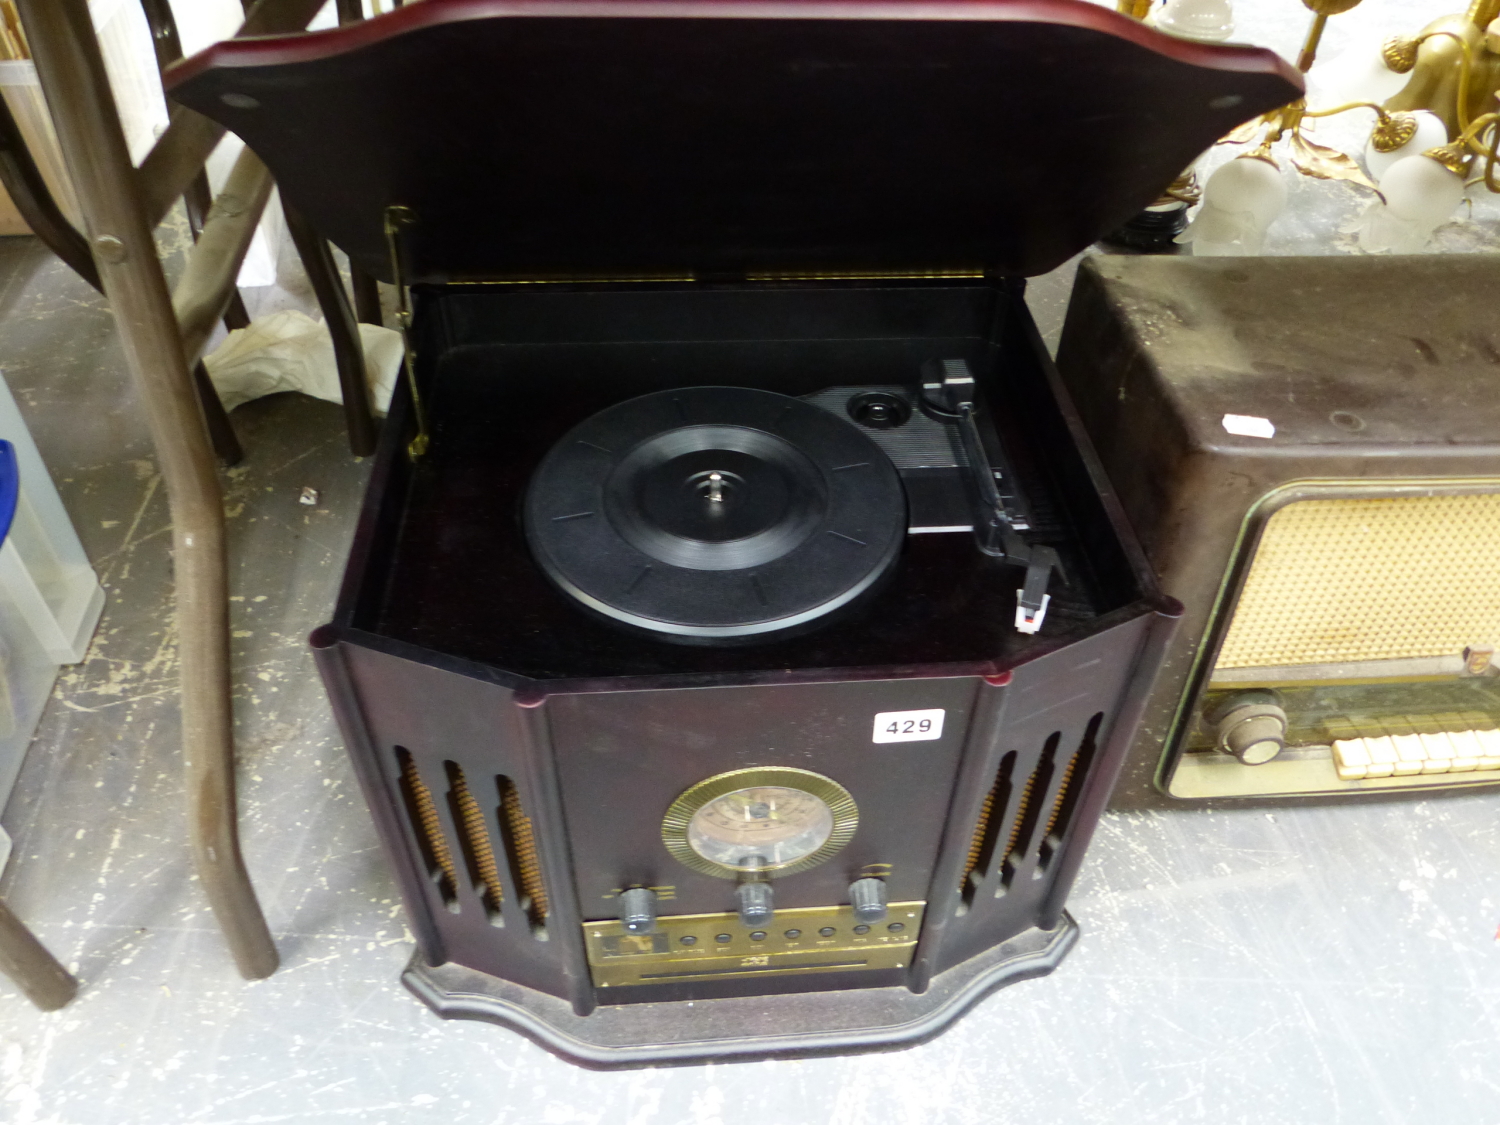 A VINTAGE BAKELITE PHILLIPS RADIO, TOGETHER WITH A VINTAGE STYLED CD AND RECORD PLAYER TUNER.